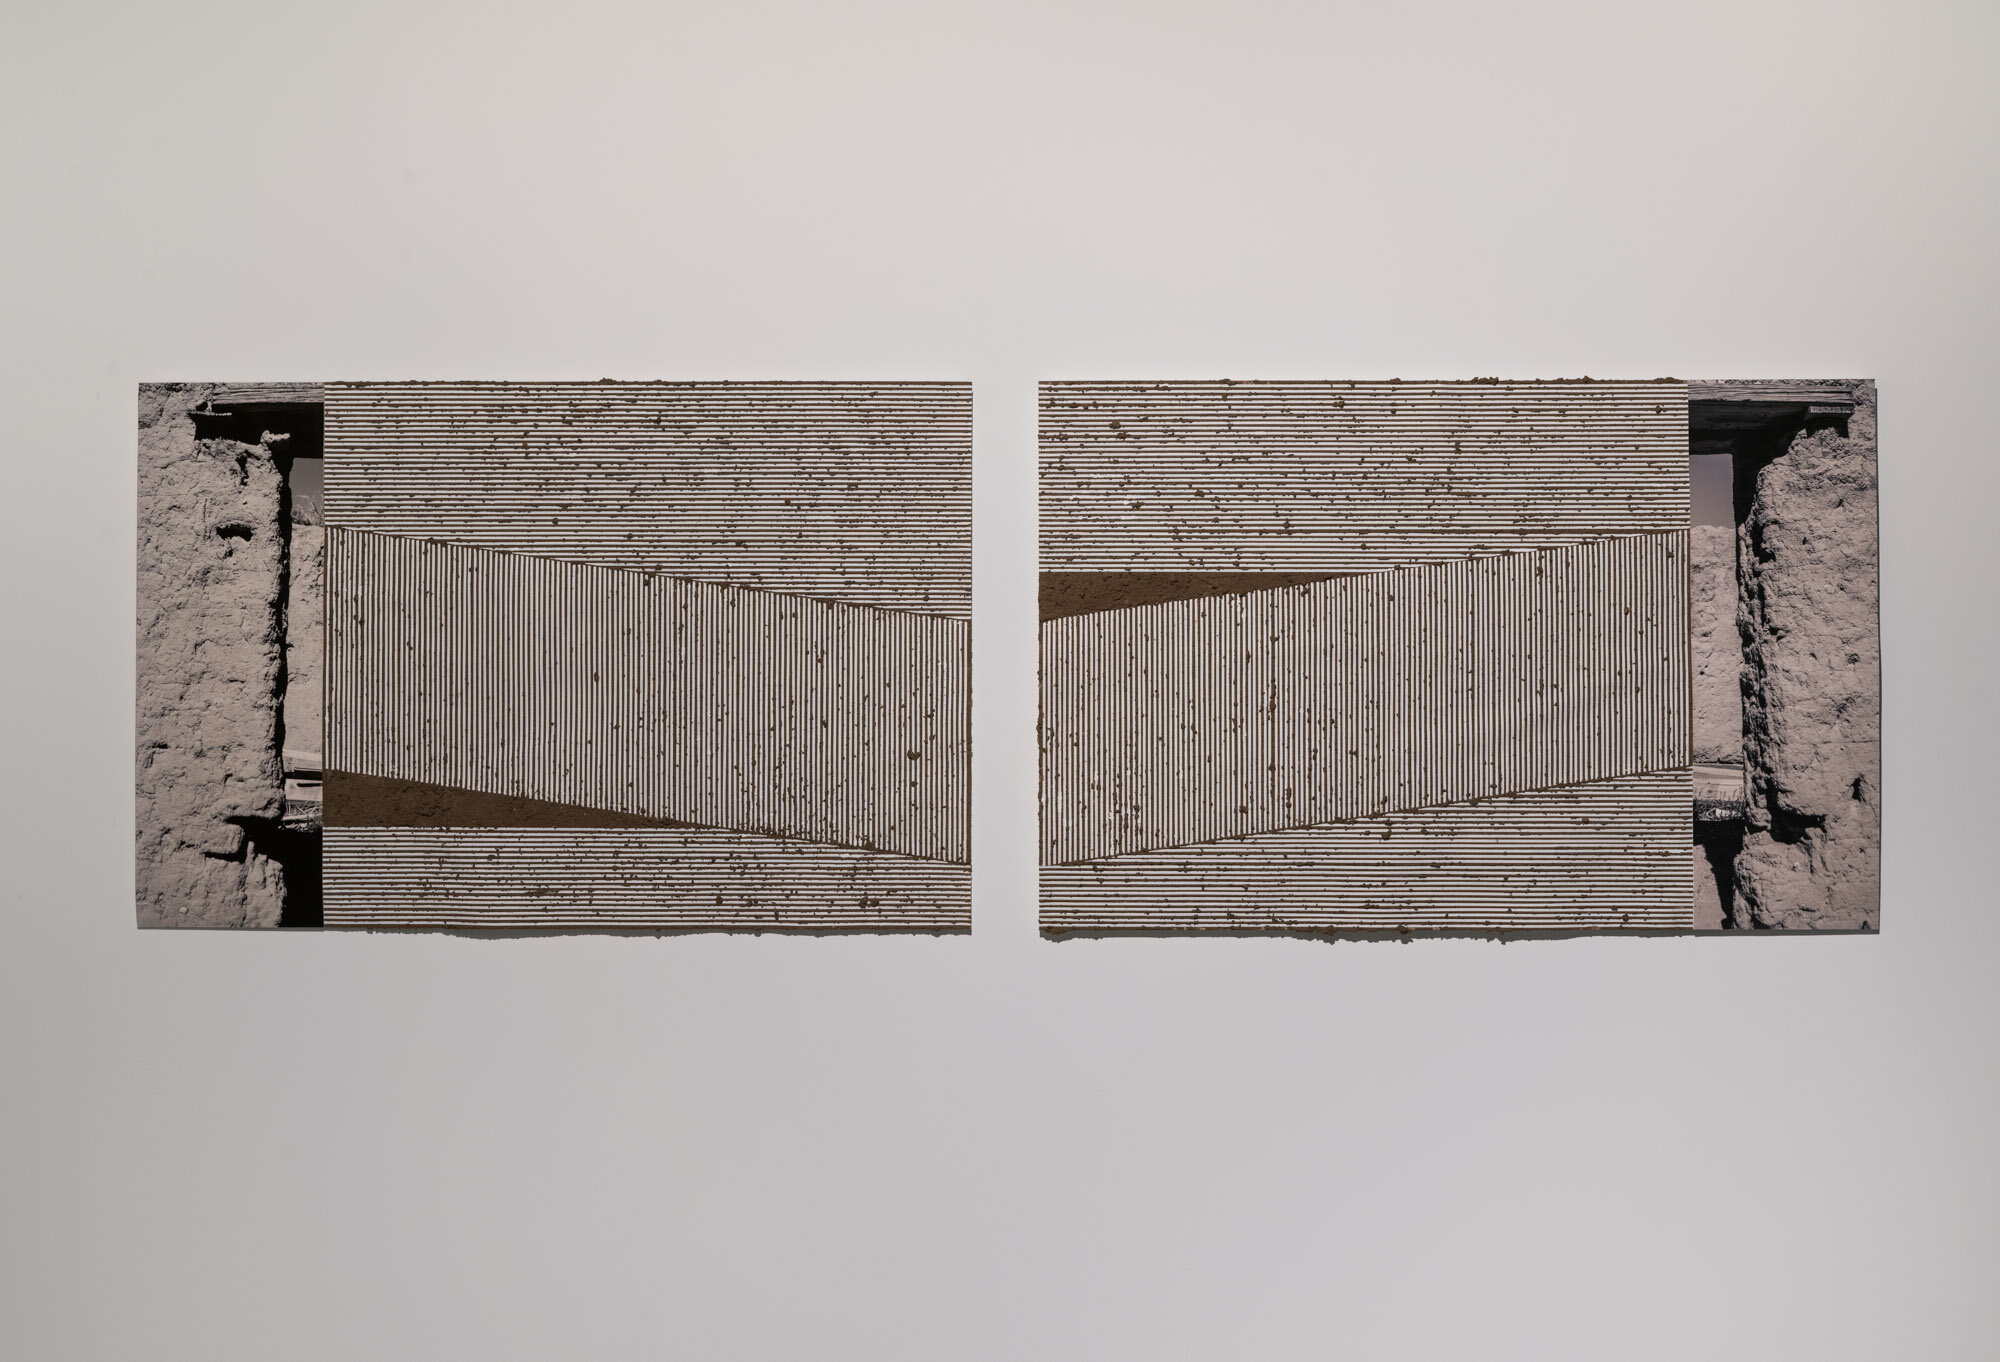   IAmYou/OrYouAreMe (diptych)&nbsp; 2018 Adobe mud, inkjet print on Hahnemühle paper, and graphite on paper 26 × 80&nbsp;inches 